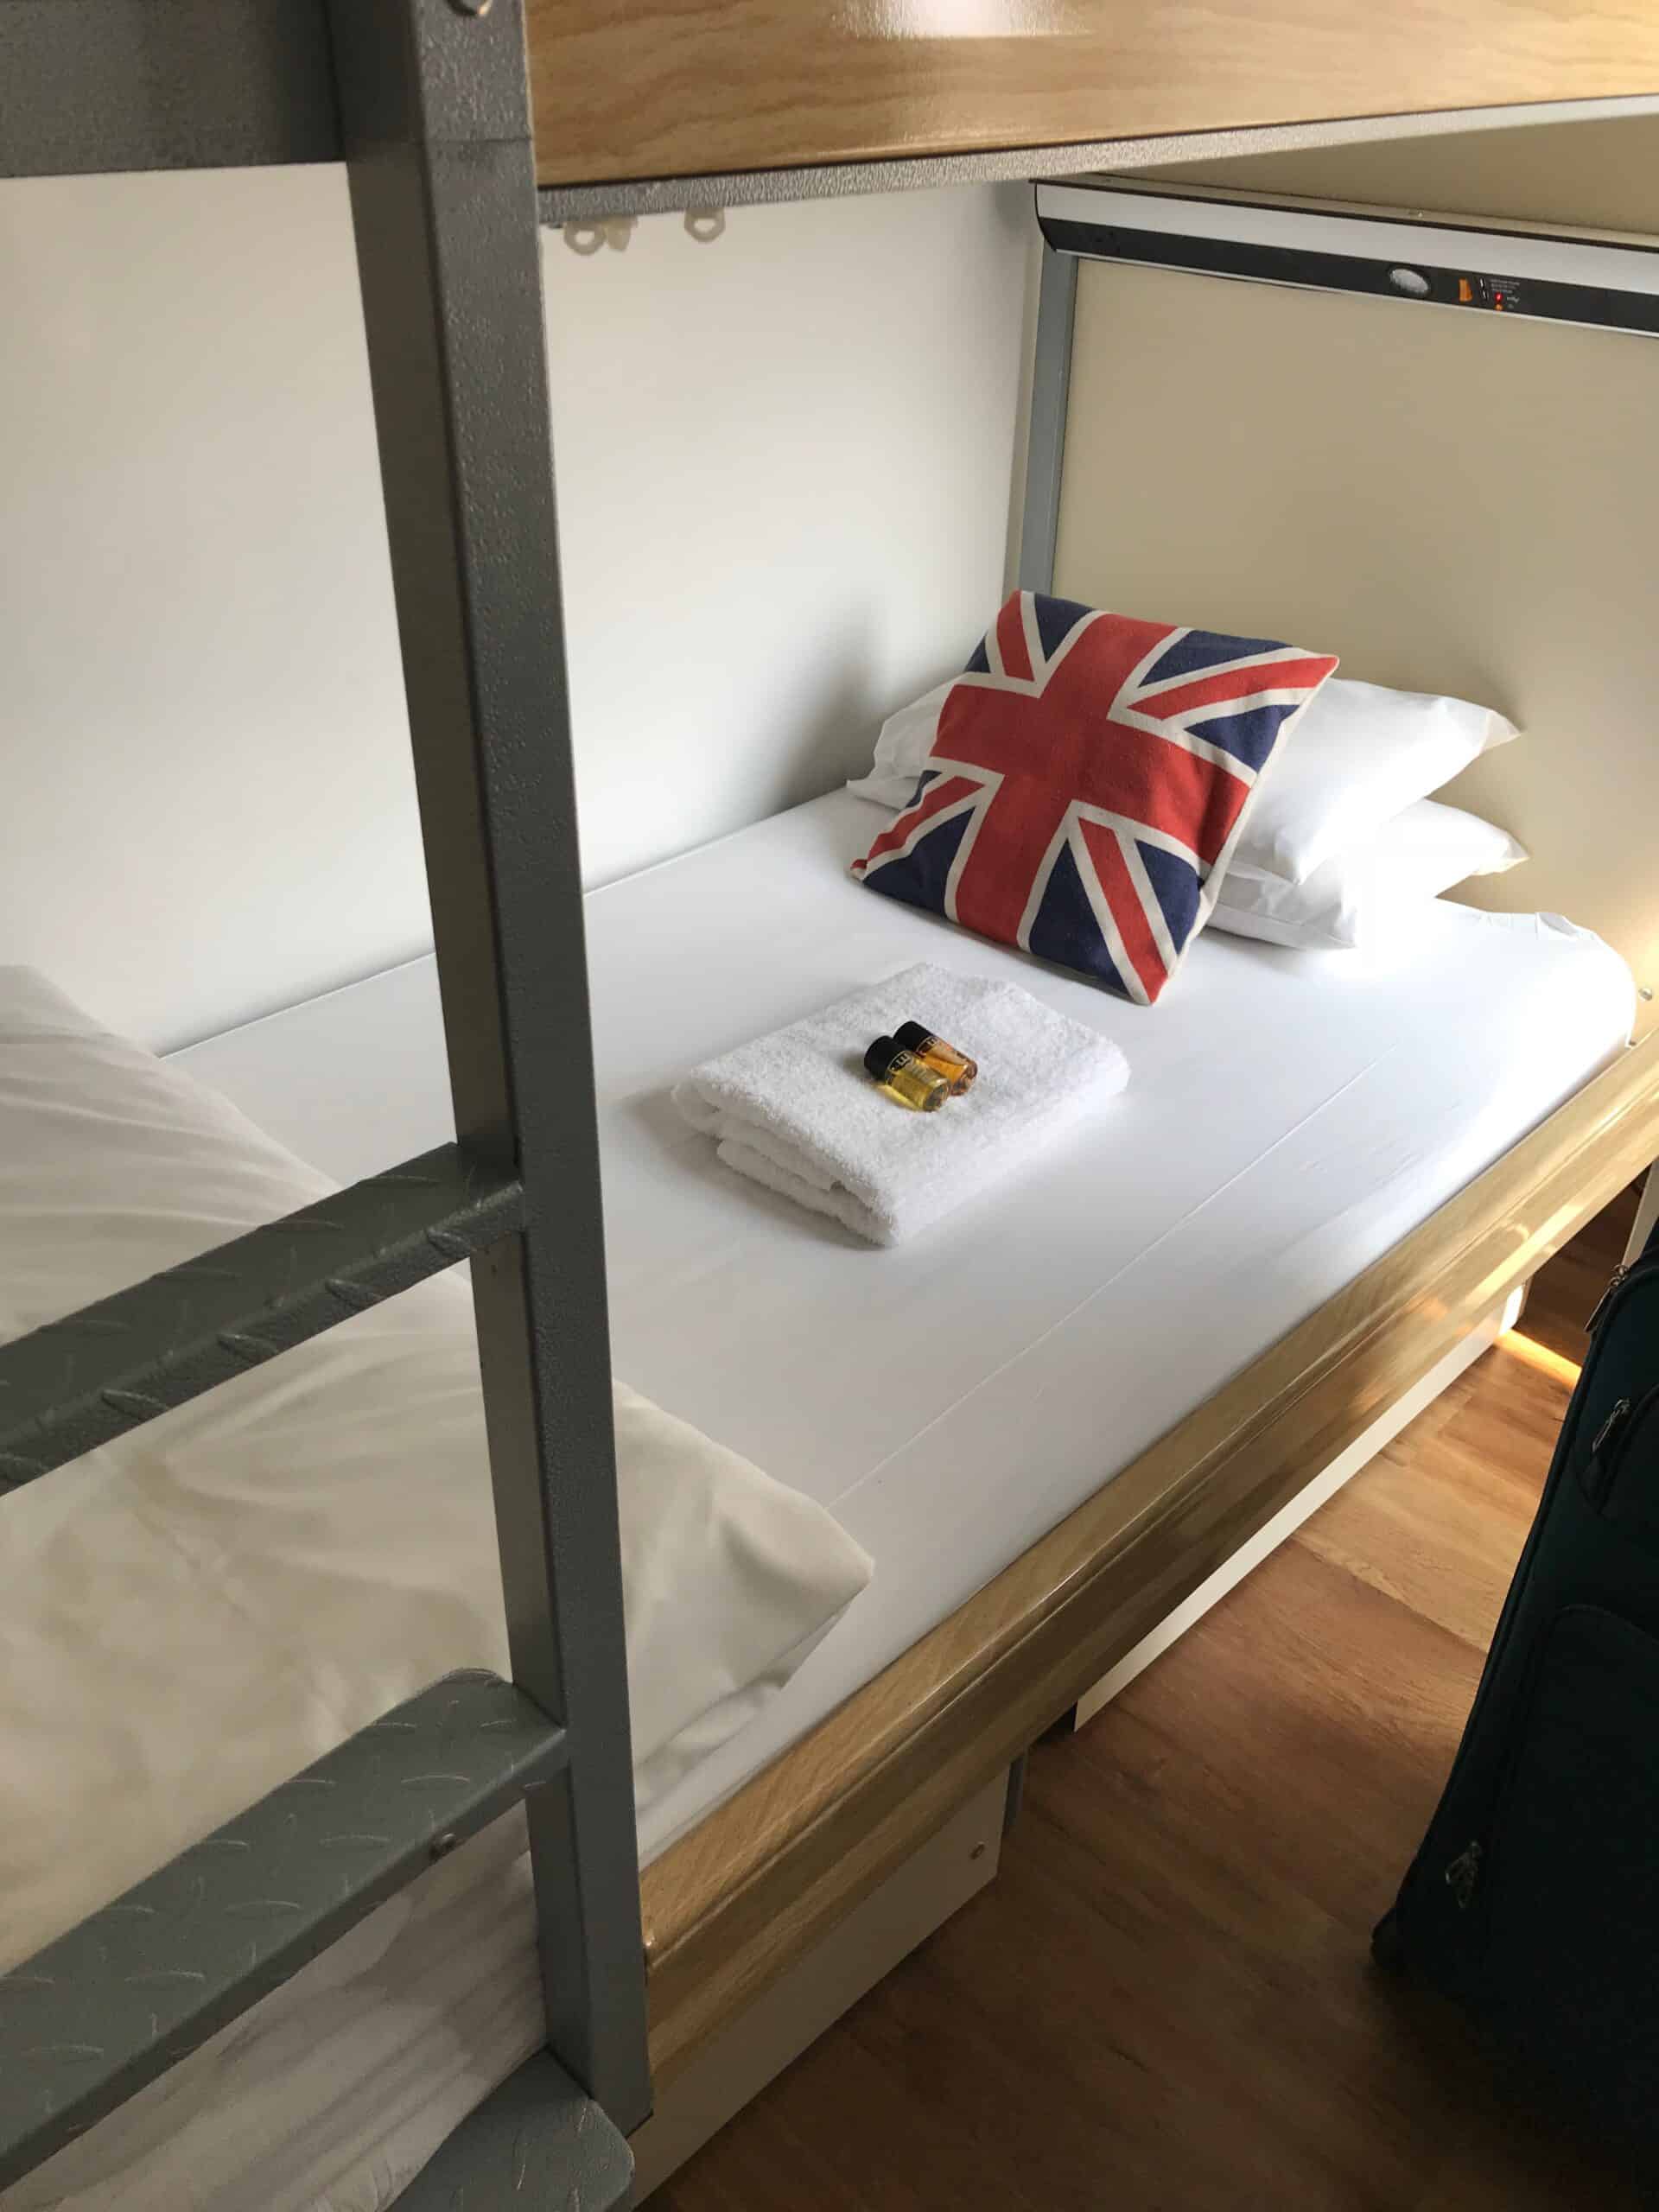 The bottom bunk of a bunk bed in a hostel in London. The bed is topped with a blanket, a towel with toiletries, and three pillows. One of the pillows is decorated with the United Kingdom flag.